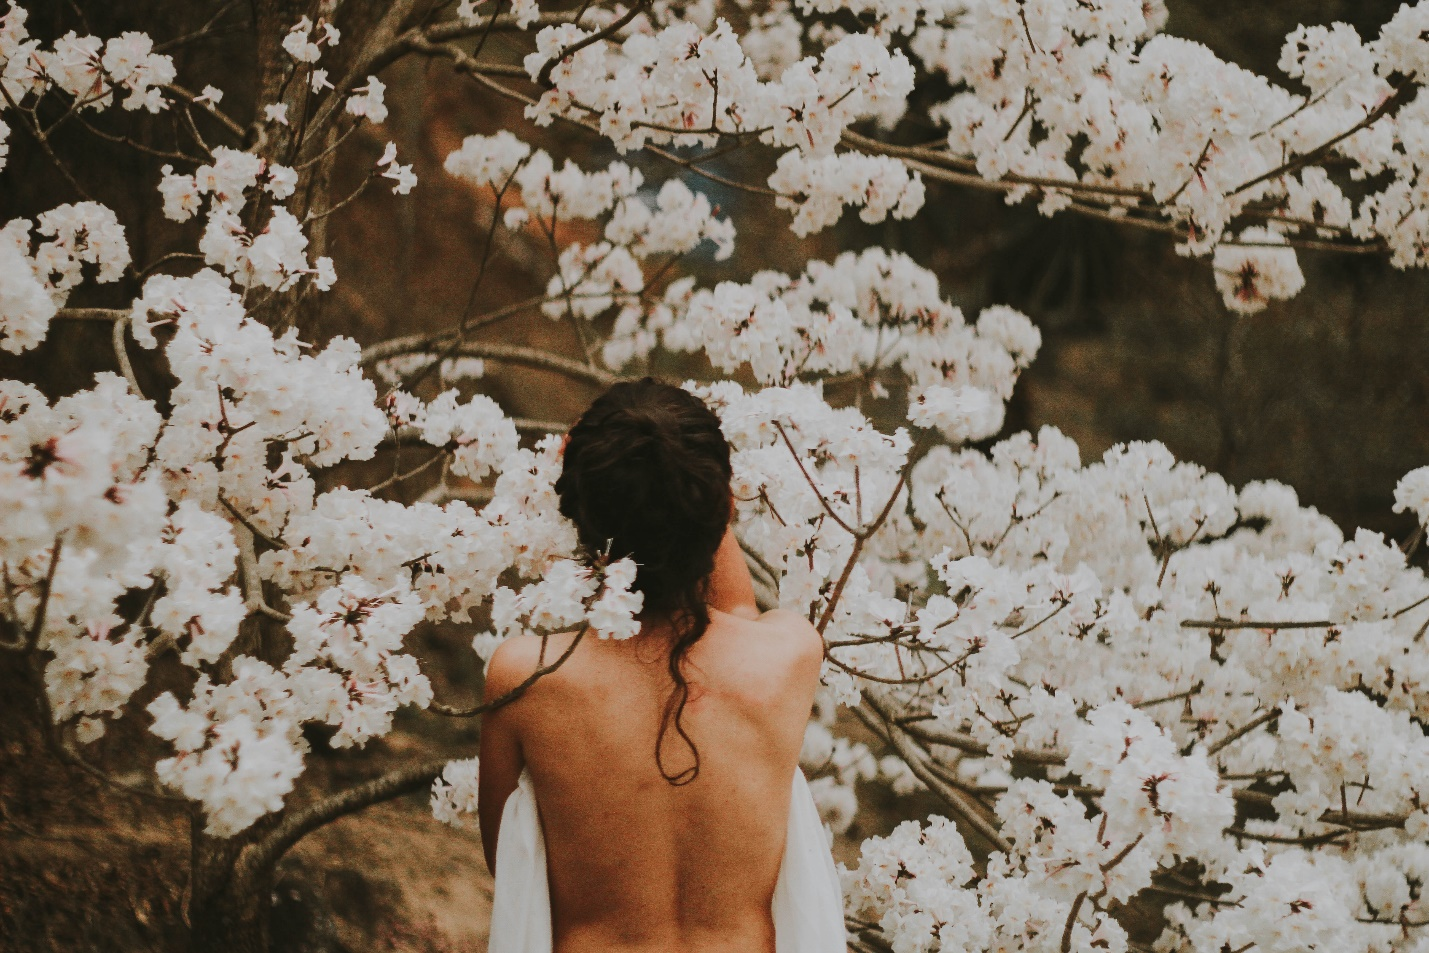  Woman Sitting Next to a Tree With White Flowers